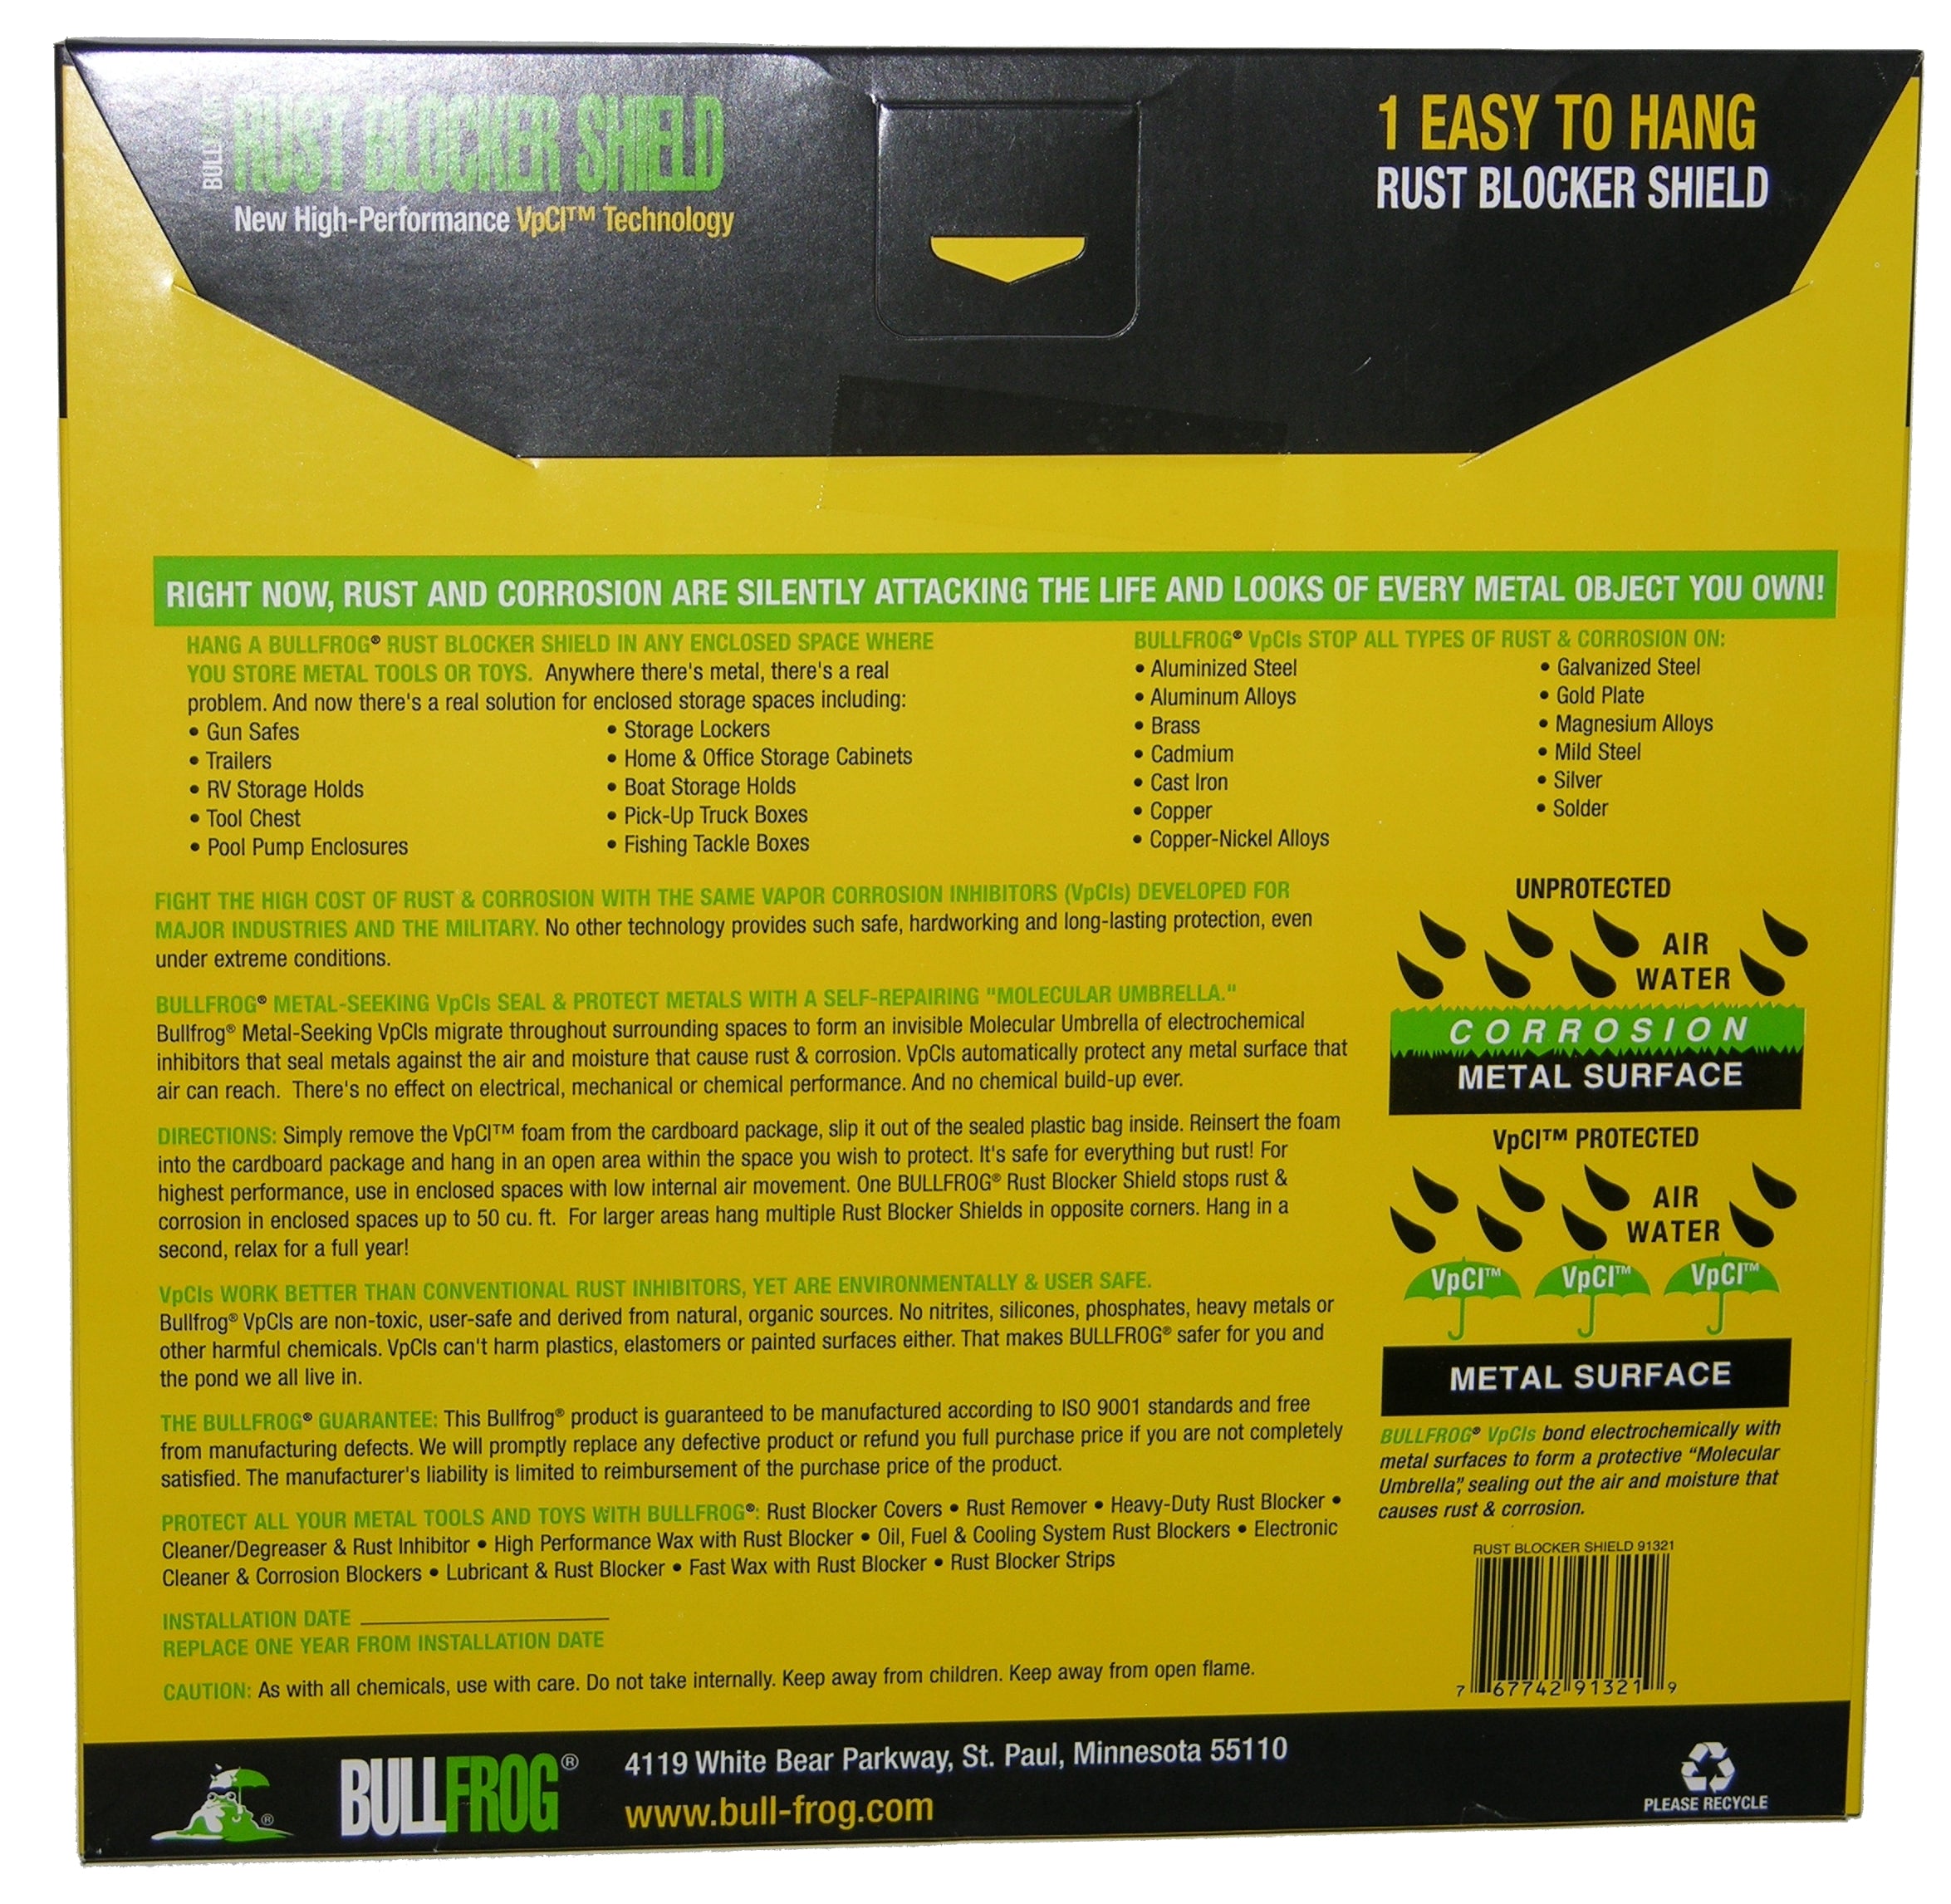 Bull Frog, Bull Frog 91321 Rust Blocker Emitter Shield Protects up to 50 Cu Ft Enclosed Space